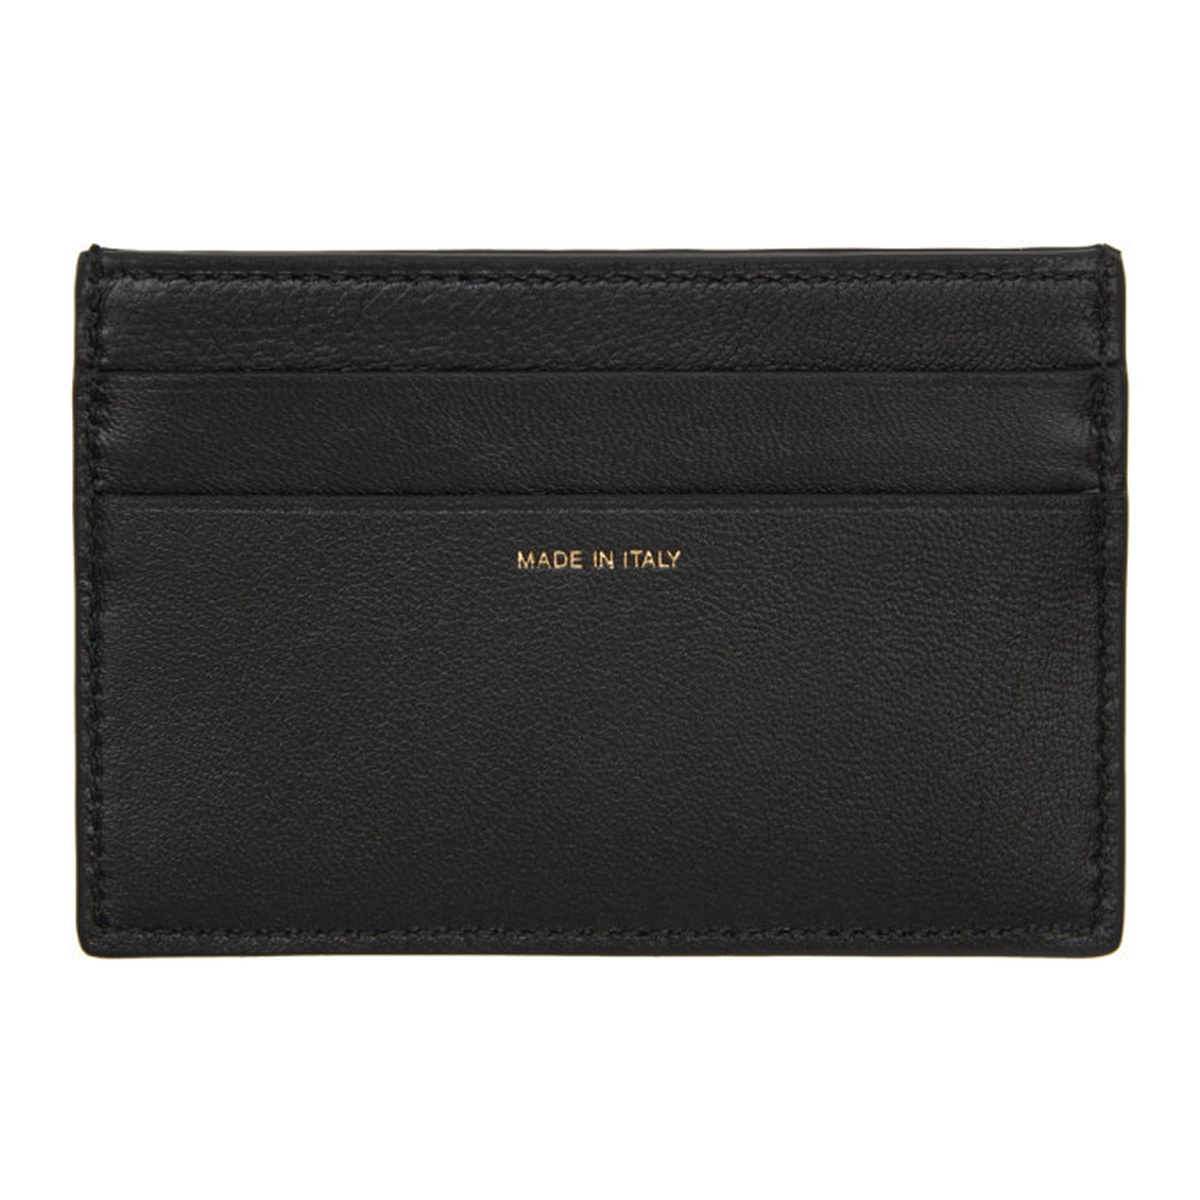 Paul Smith Black and Blue Gradient Card Holder Paul Smith